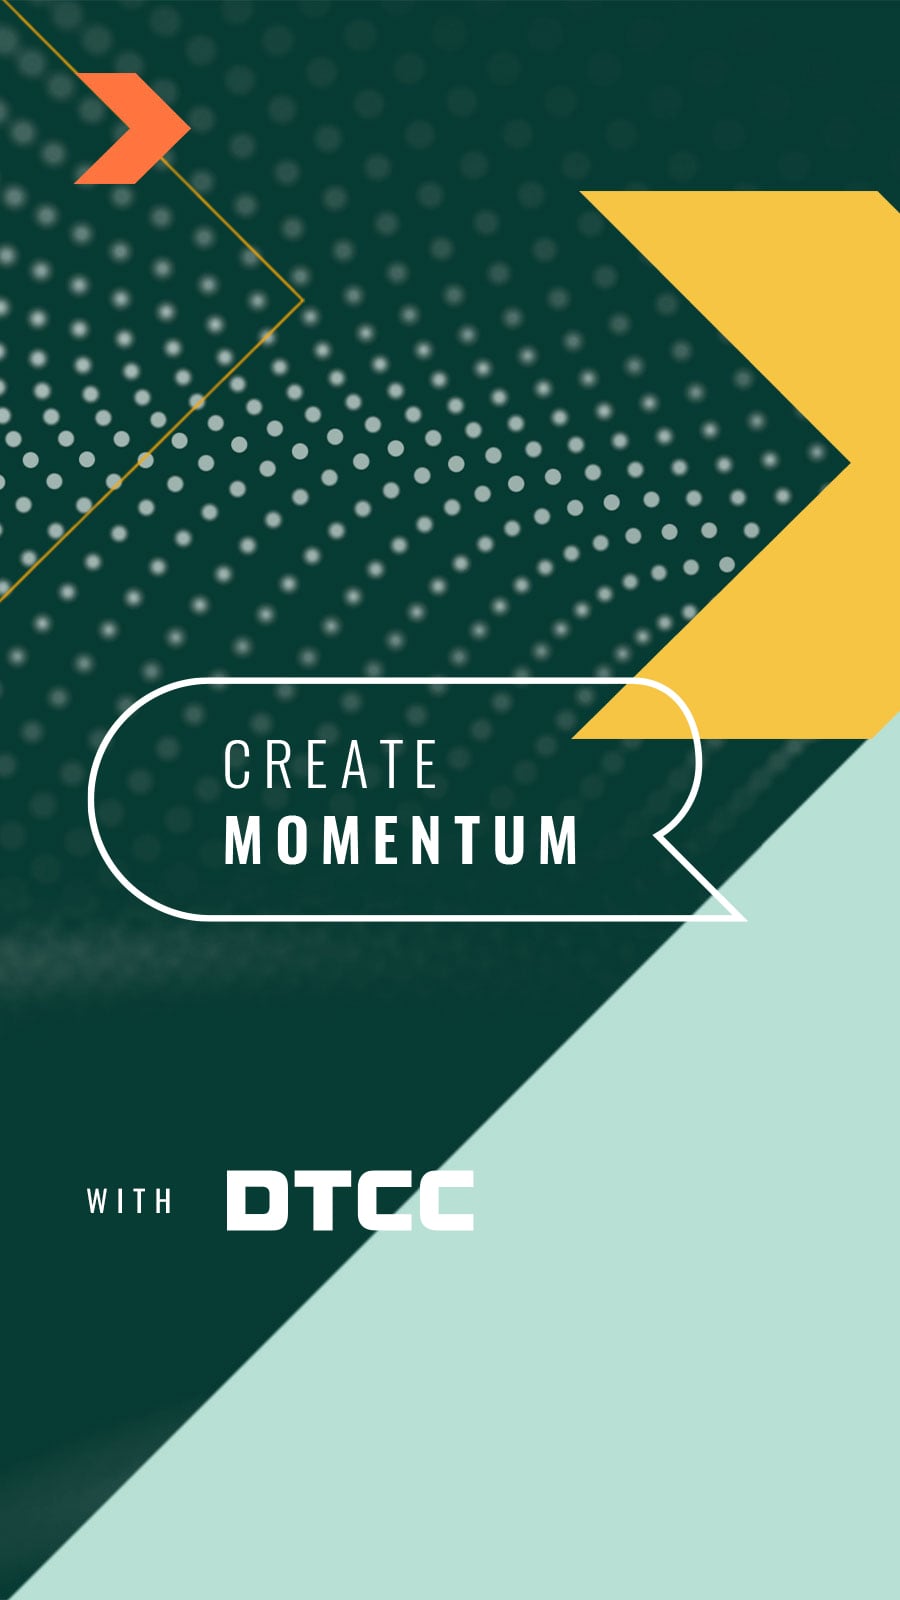 Create Momentum with DTCC